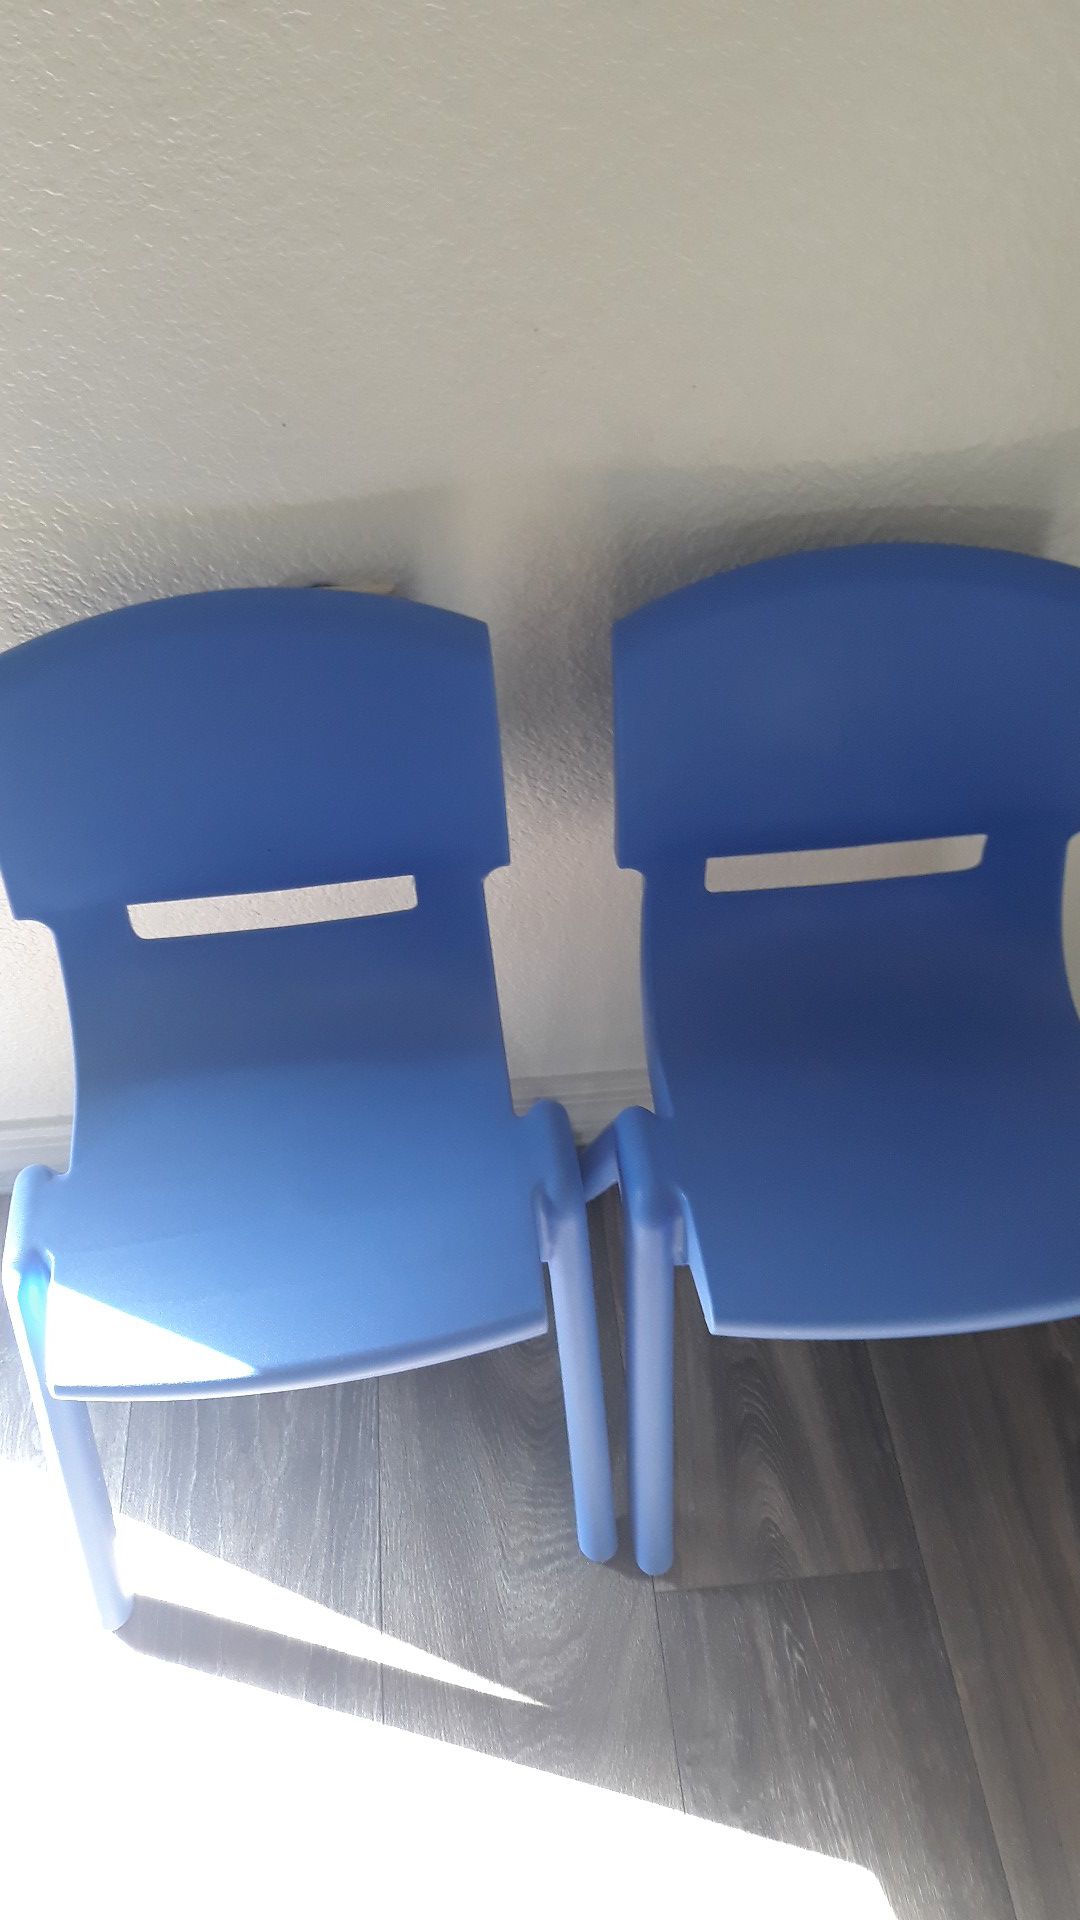 2 toddler/kid chairs in plastic